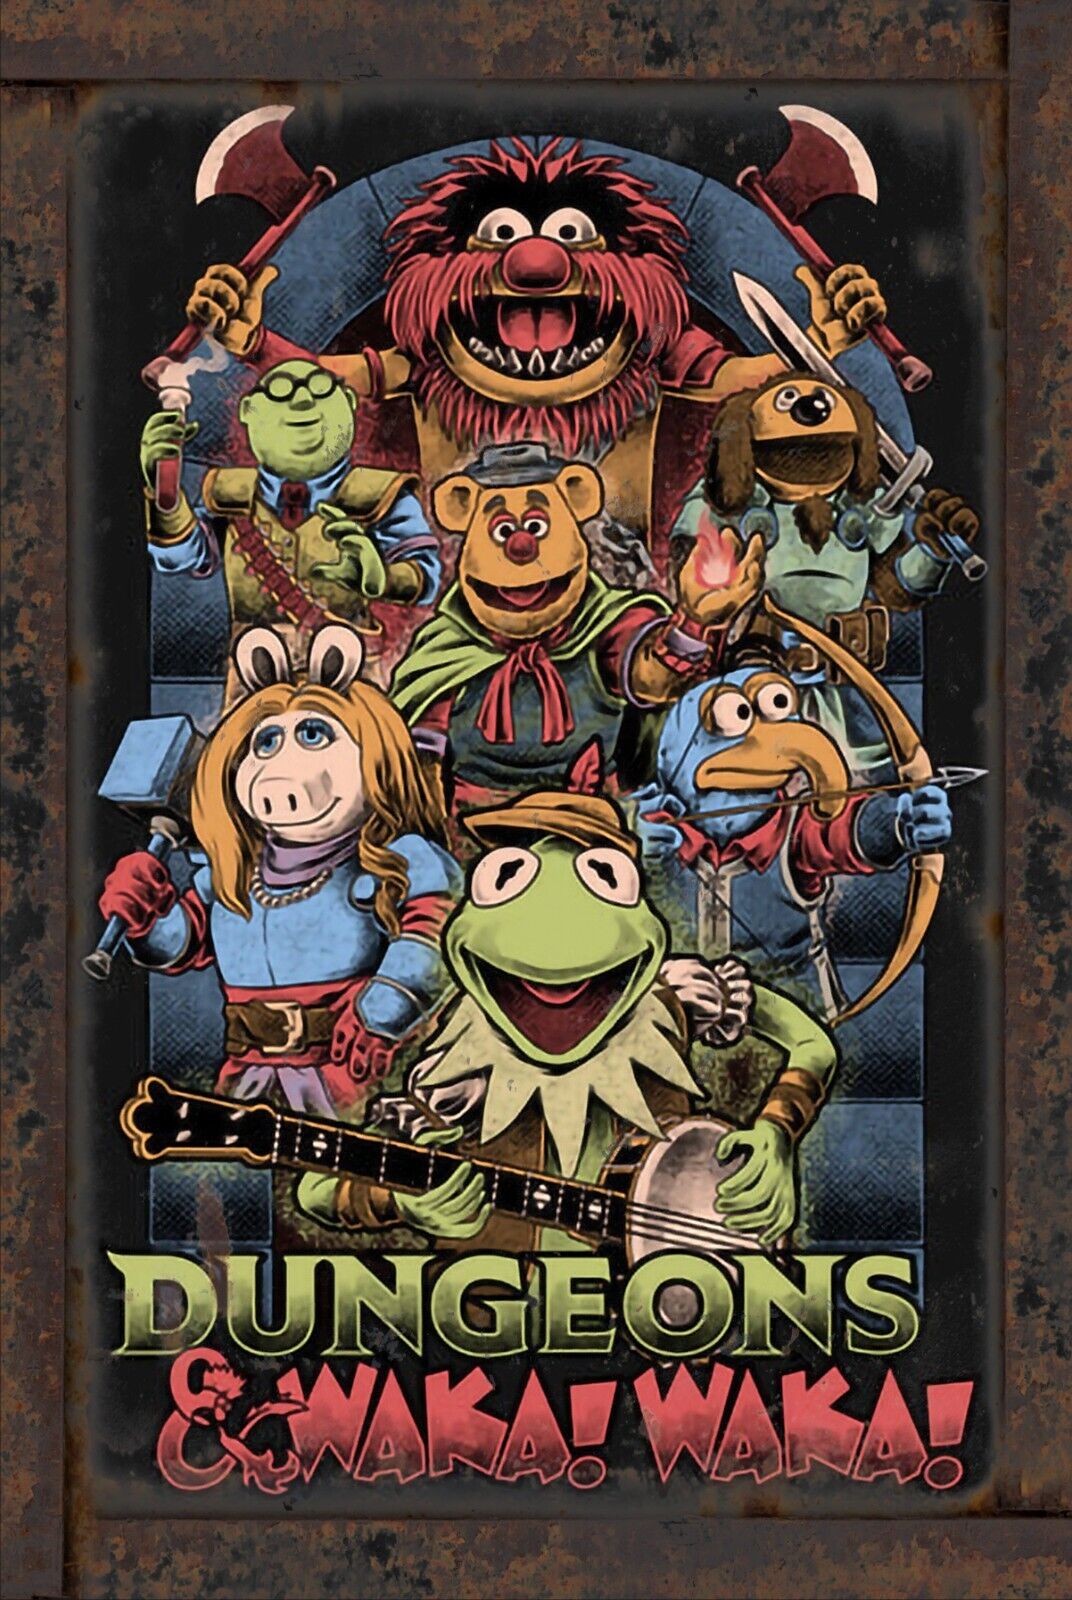 The Muppets 8x12 Rustic Vintage Style Tin Sign Metal Poster